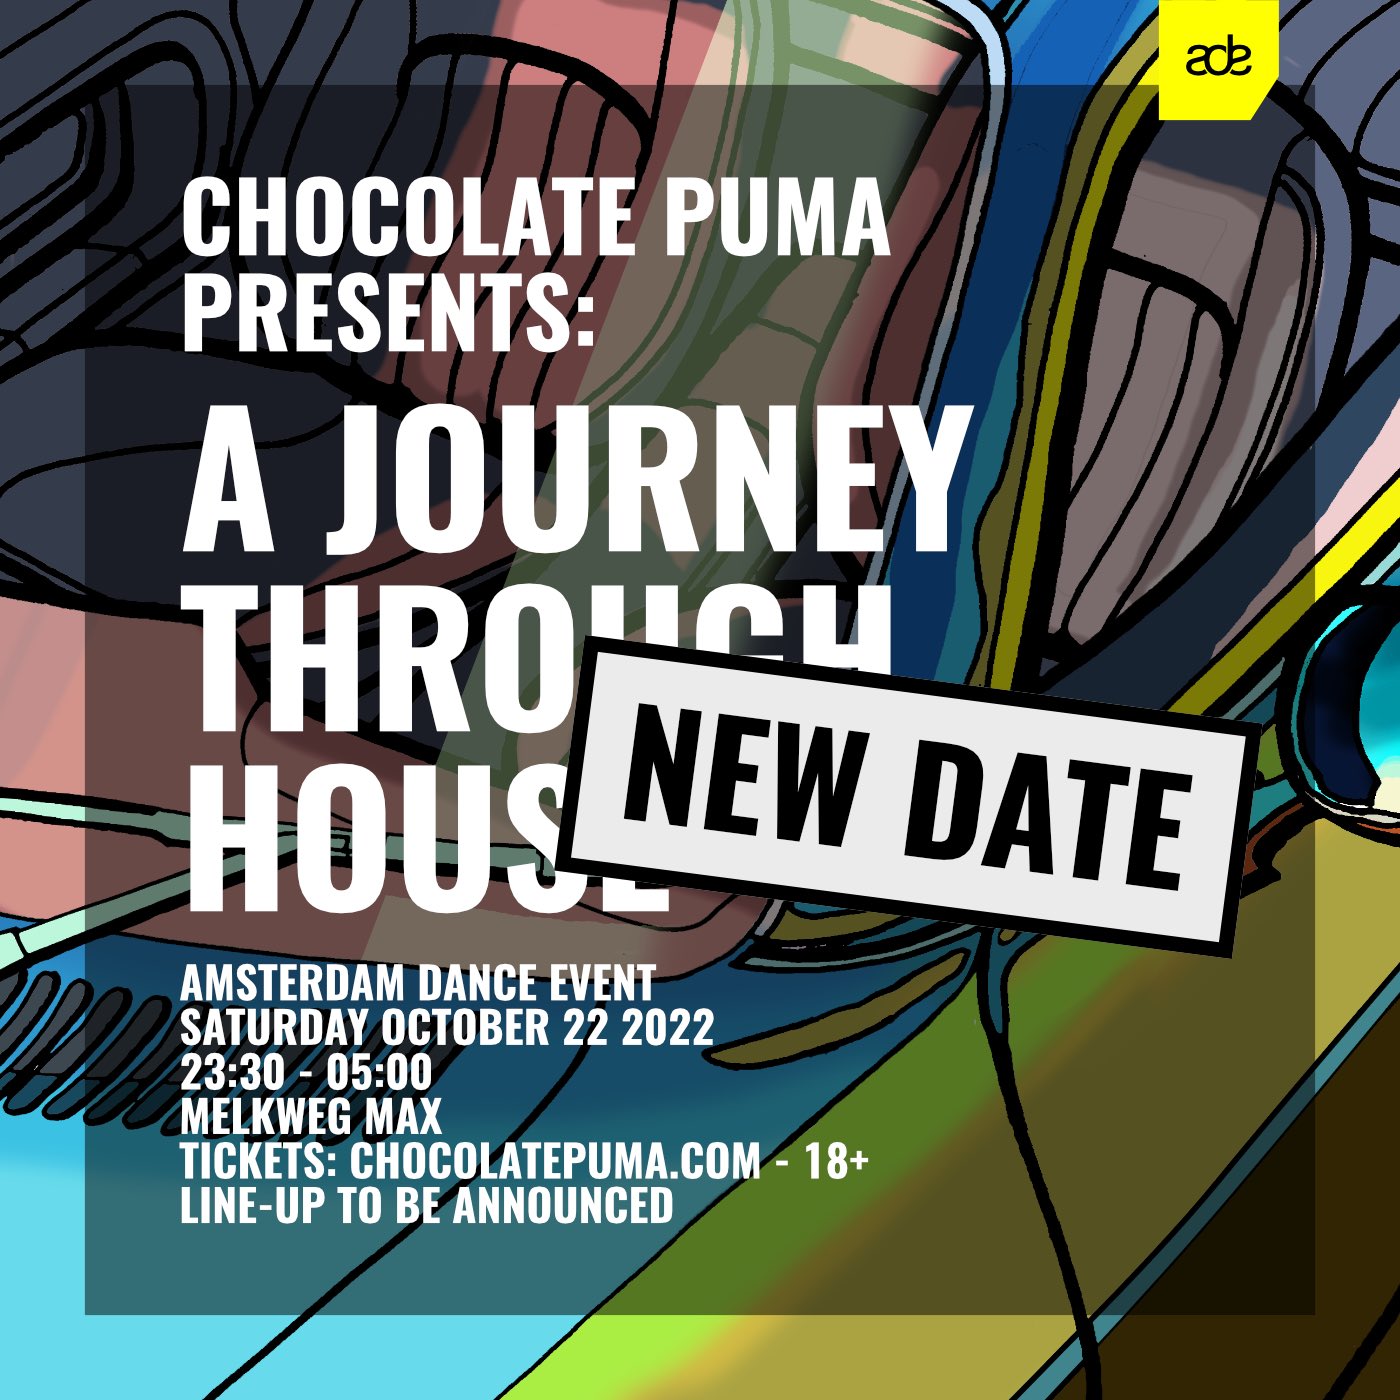 Chocolate Puma on X: "Amsterdam Dance Event 2022 ⚠️ Our 'A Journey Through  House' event that was supposed to happen last month is been rescheduled to  Saturday October 22 2022. Tickets remain